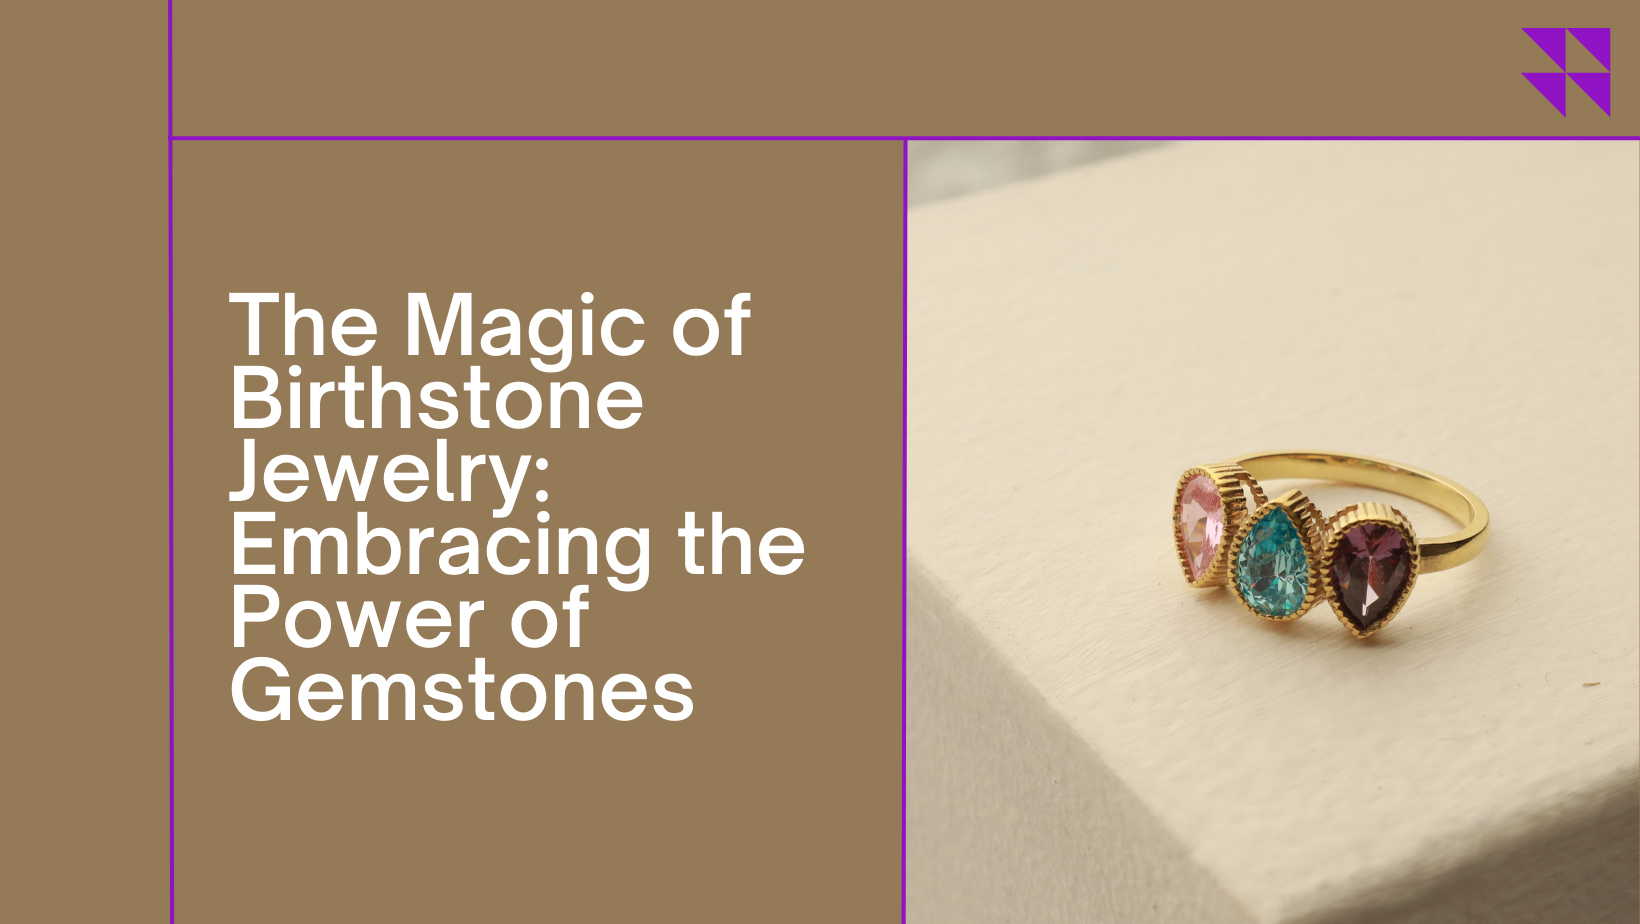 The Magic of Birthstone Jewelry: Embracing the Power of Gemstones